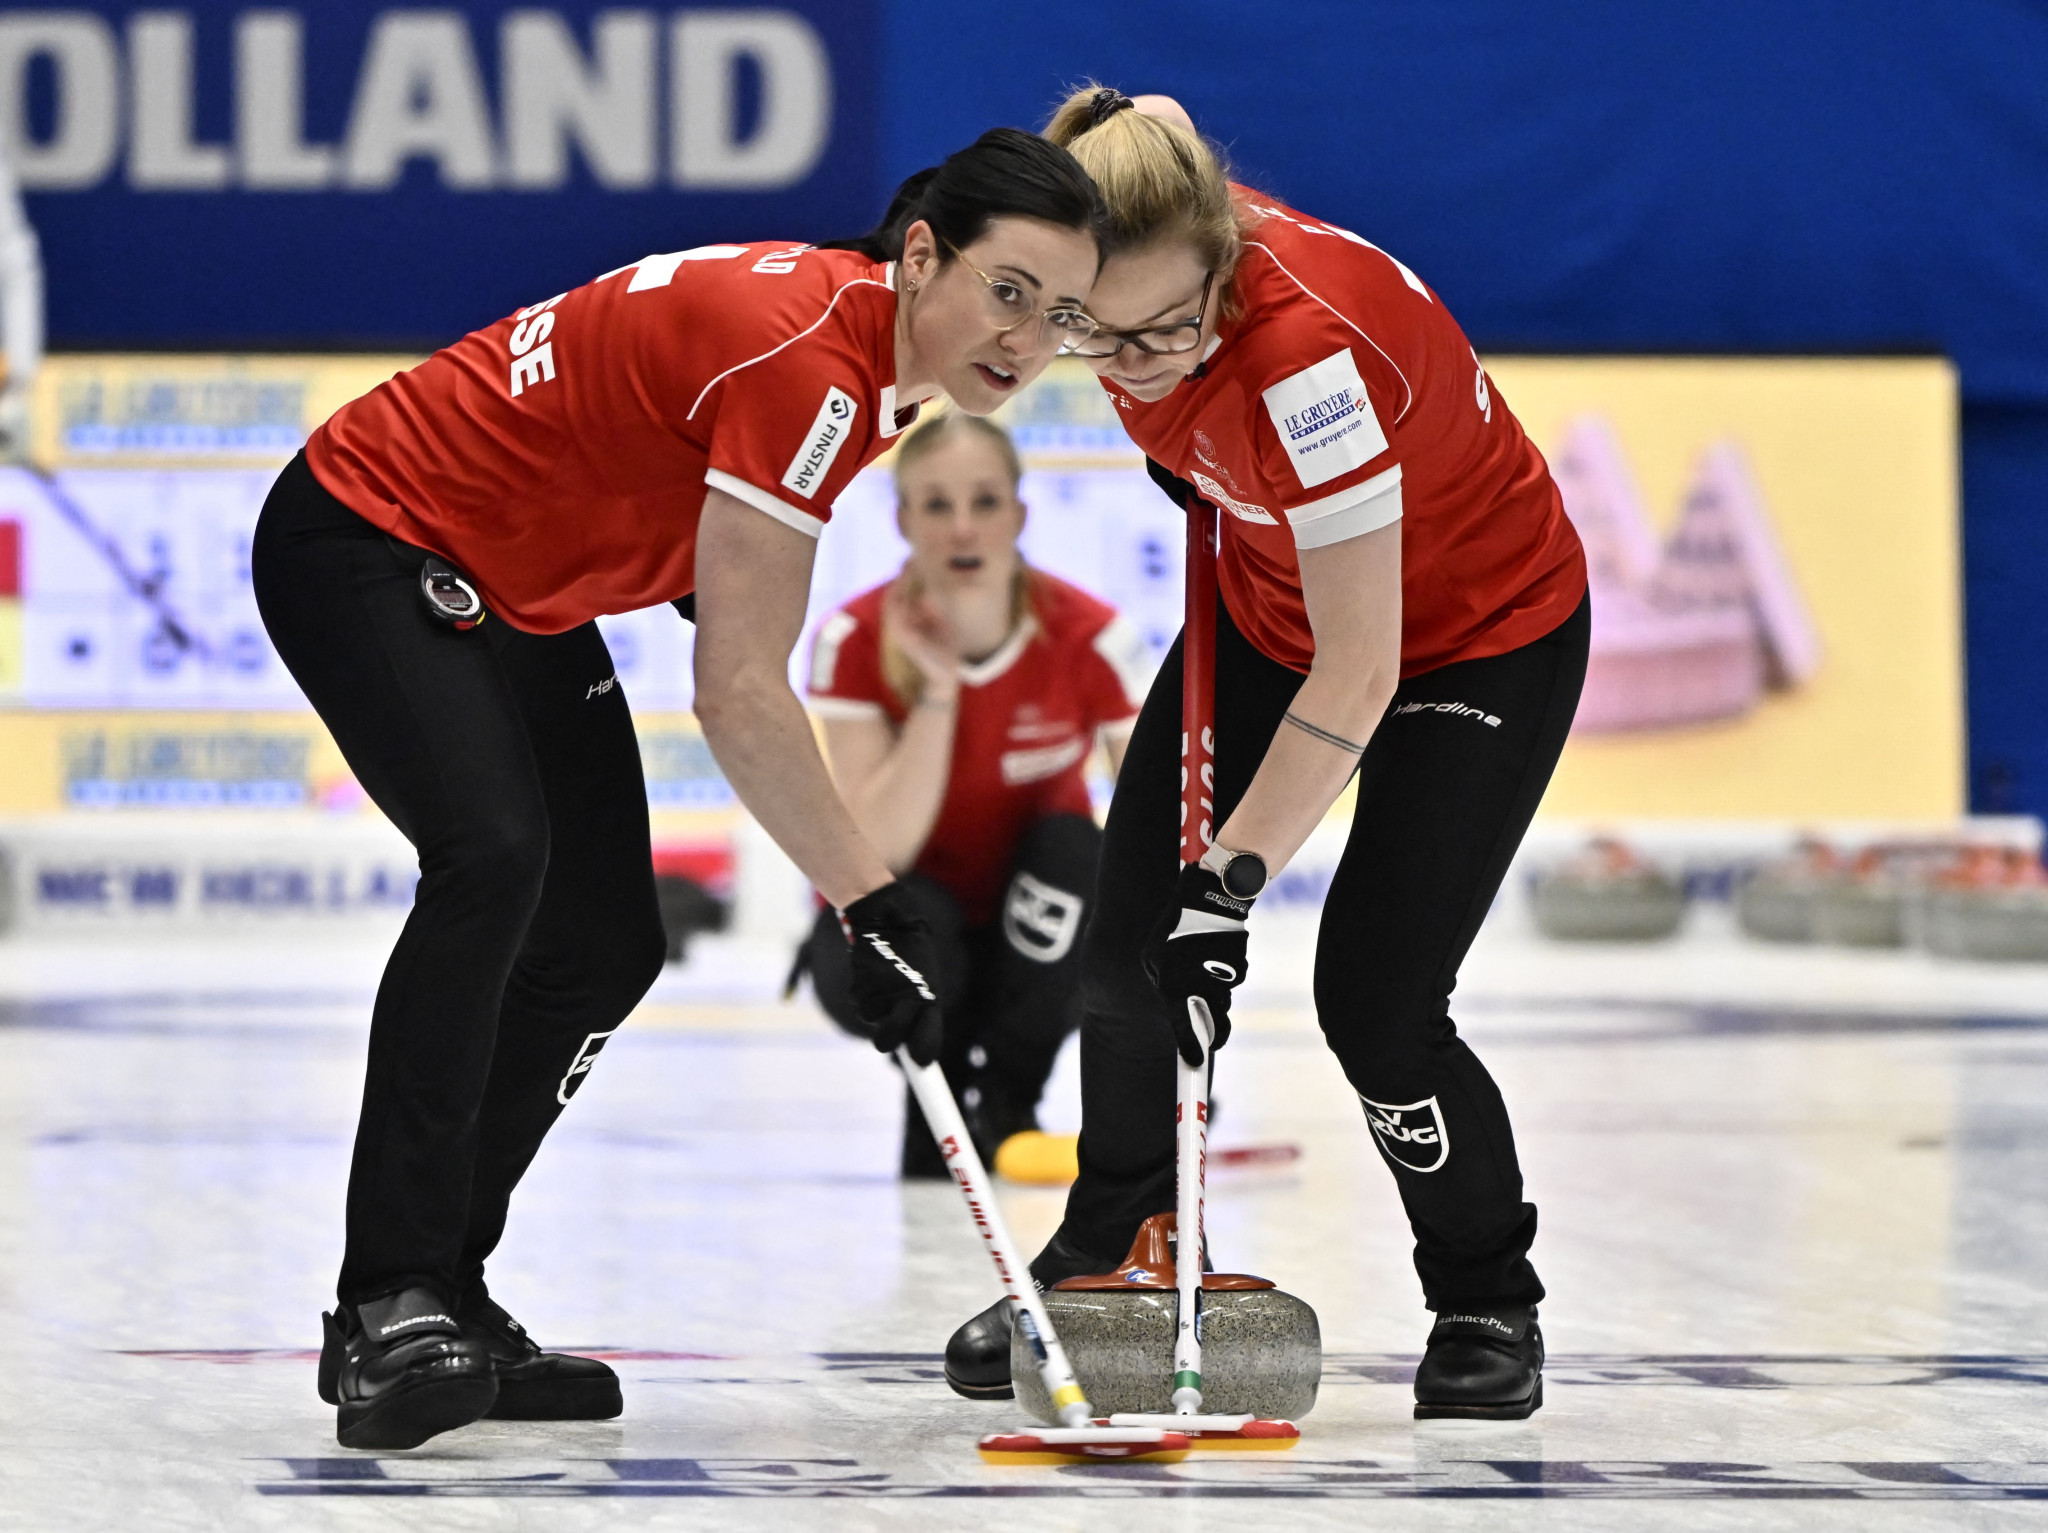 Holders Switzerland won both of their matches on the opening day of the World Women's Curling Championship, beating the US and Japan ©Getty Images